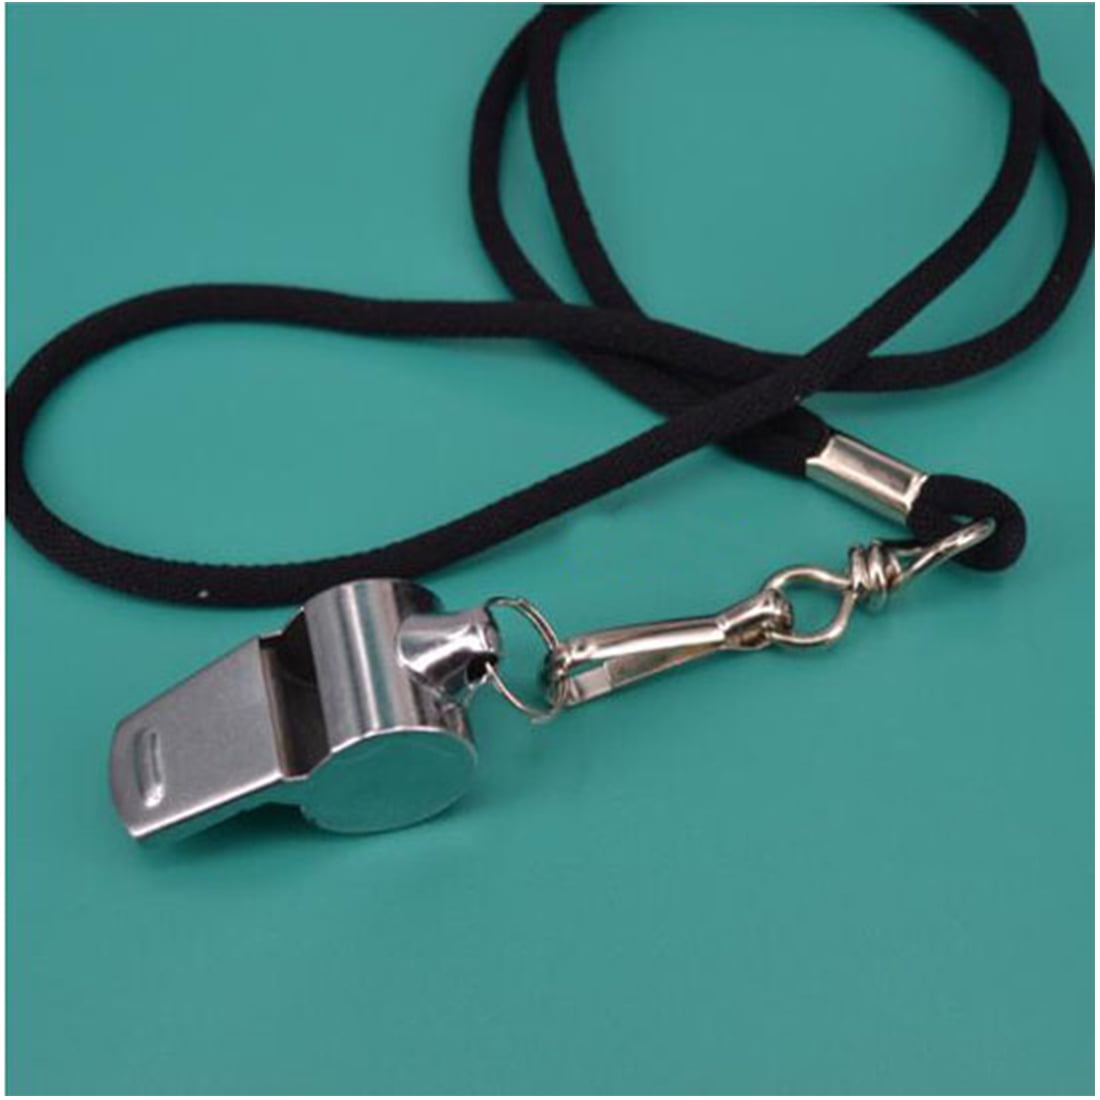 New Metal Referee Whistle and Lanyard Football Soccer V8E4 